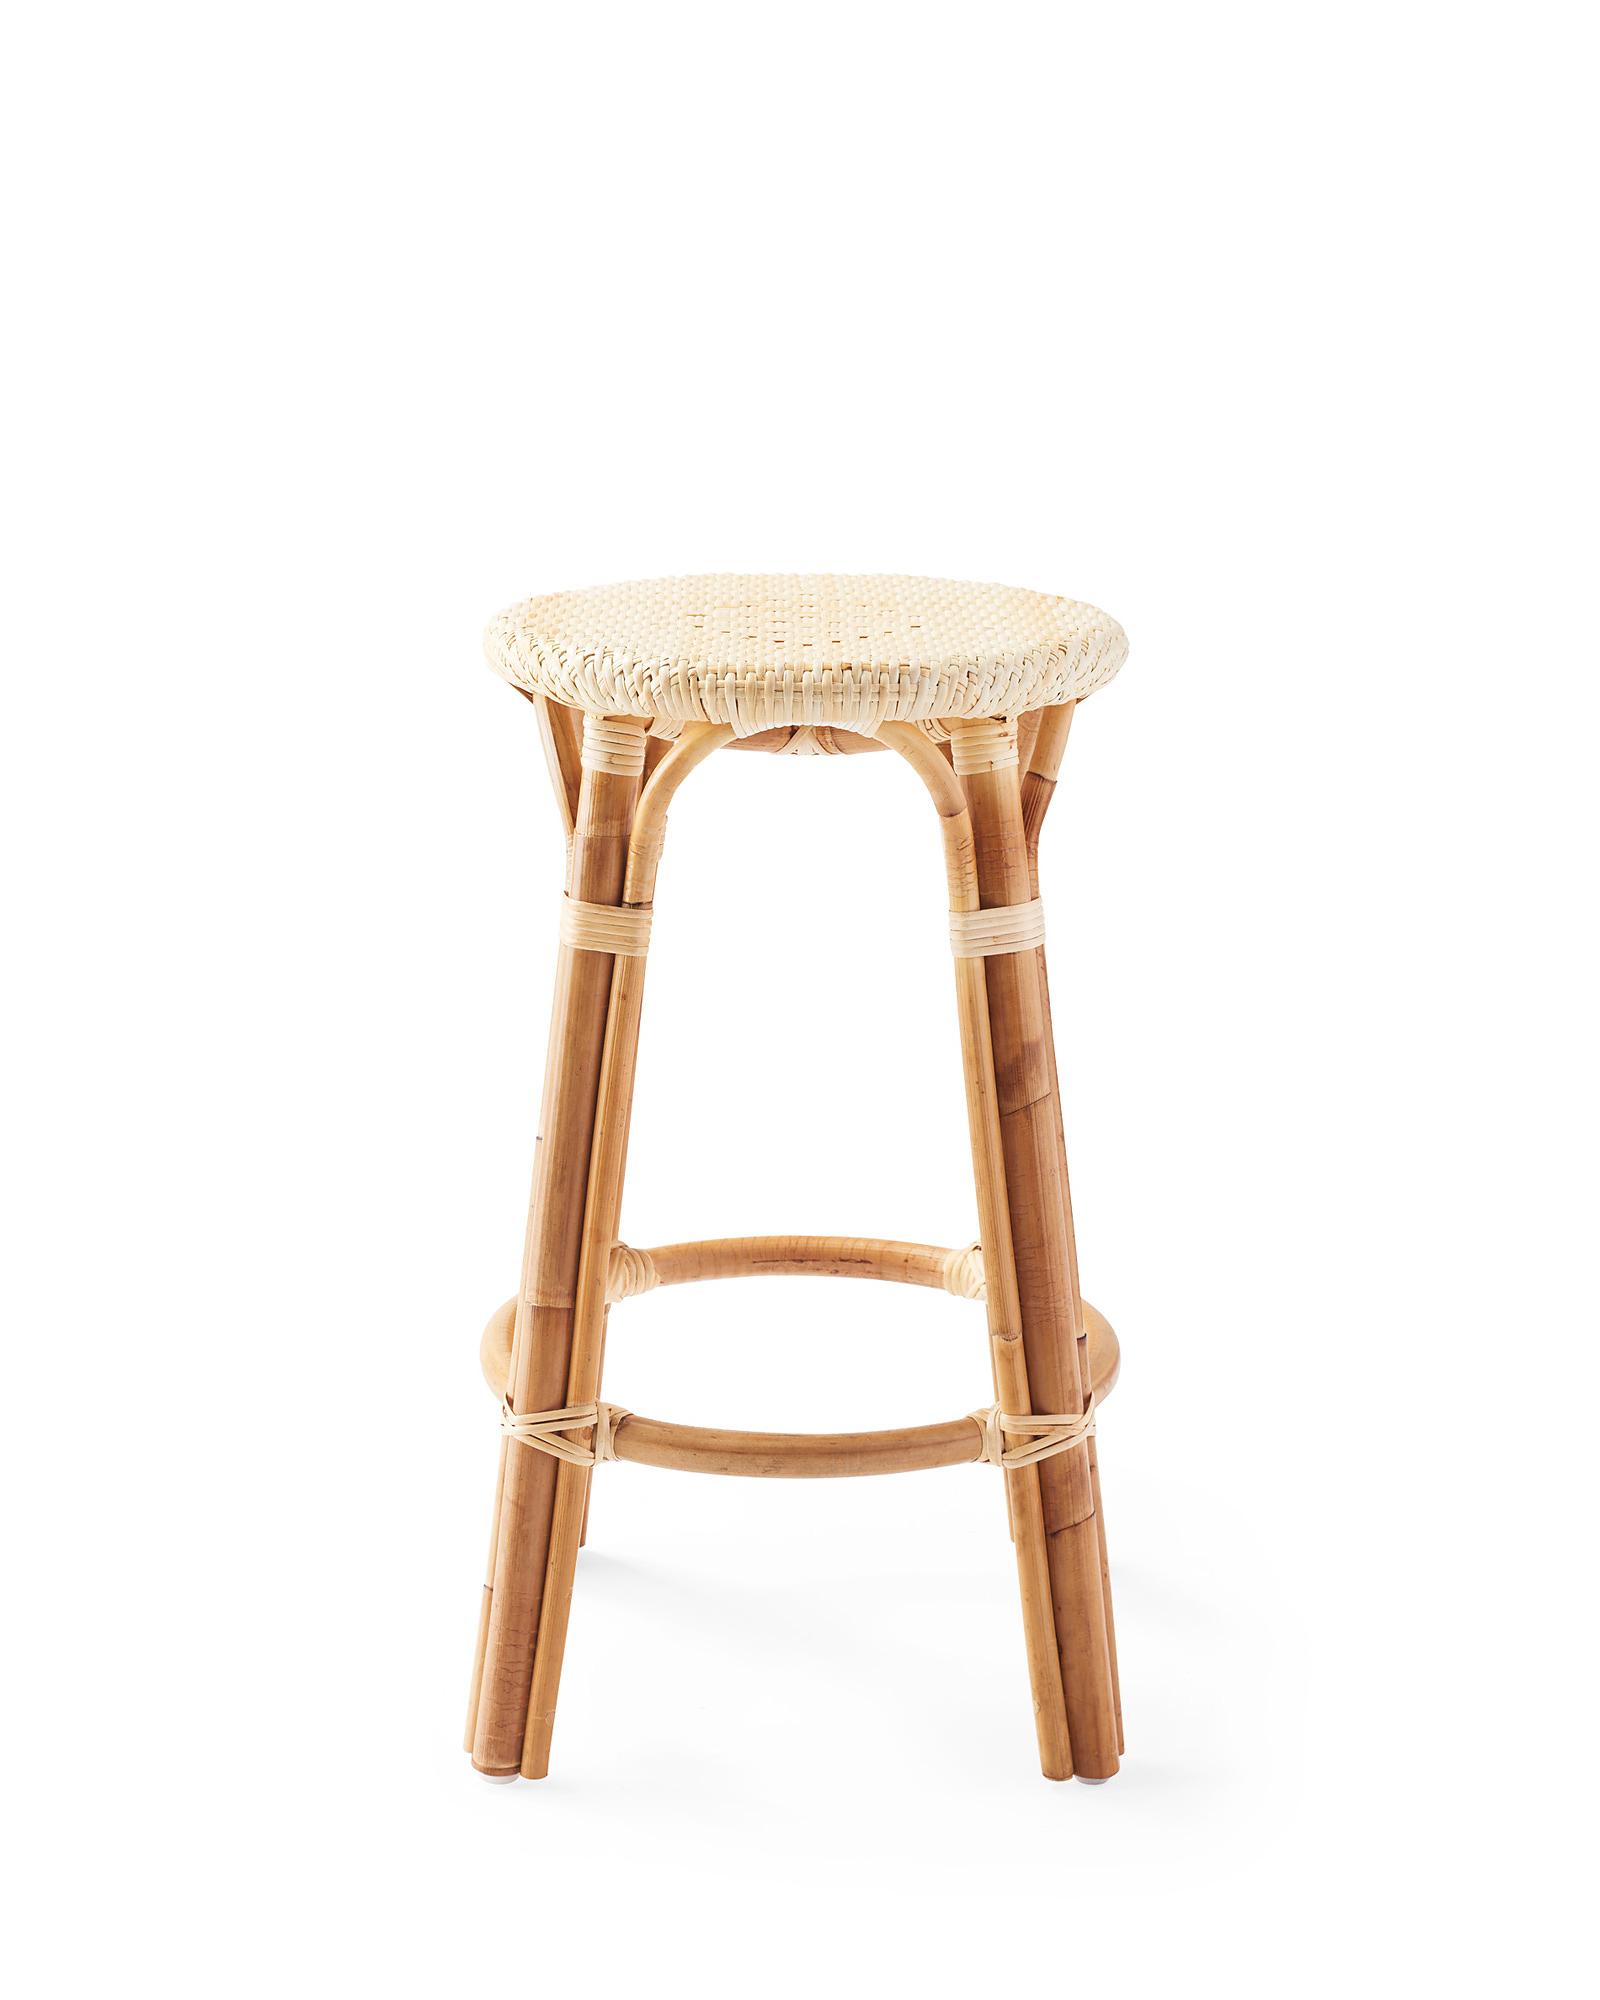 Sunwashed Riviera Rattan Backless Counter Stool